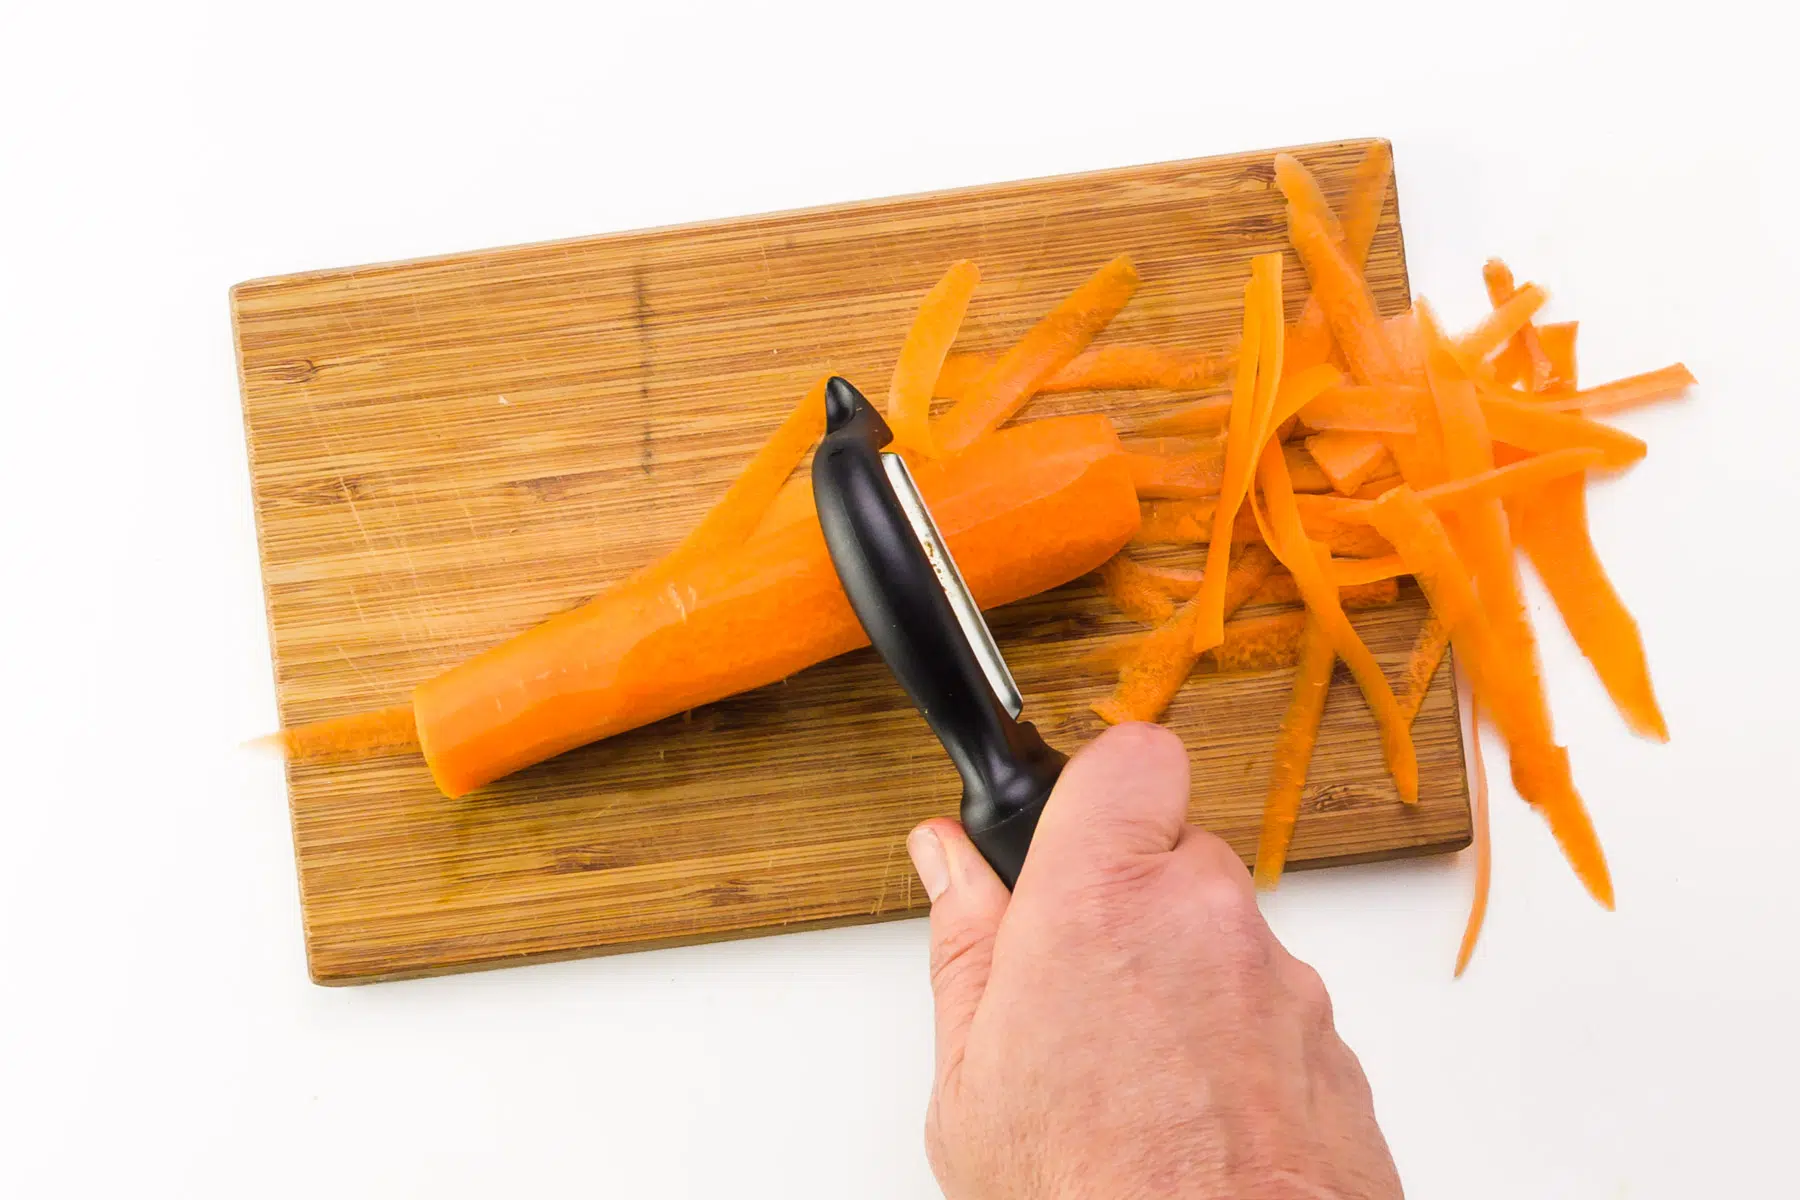 The fat end of a carrot is being shredded to whittle it down.